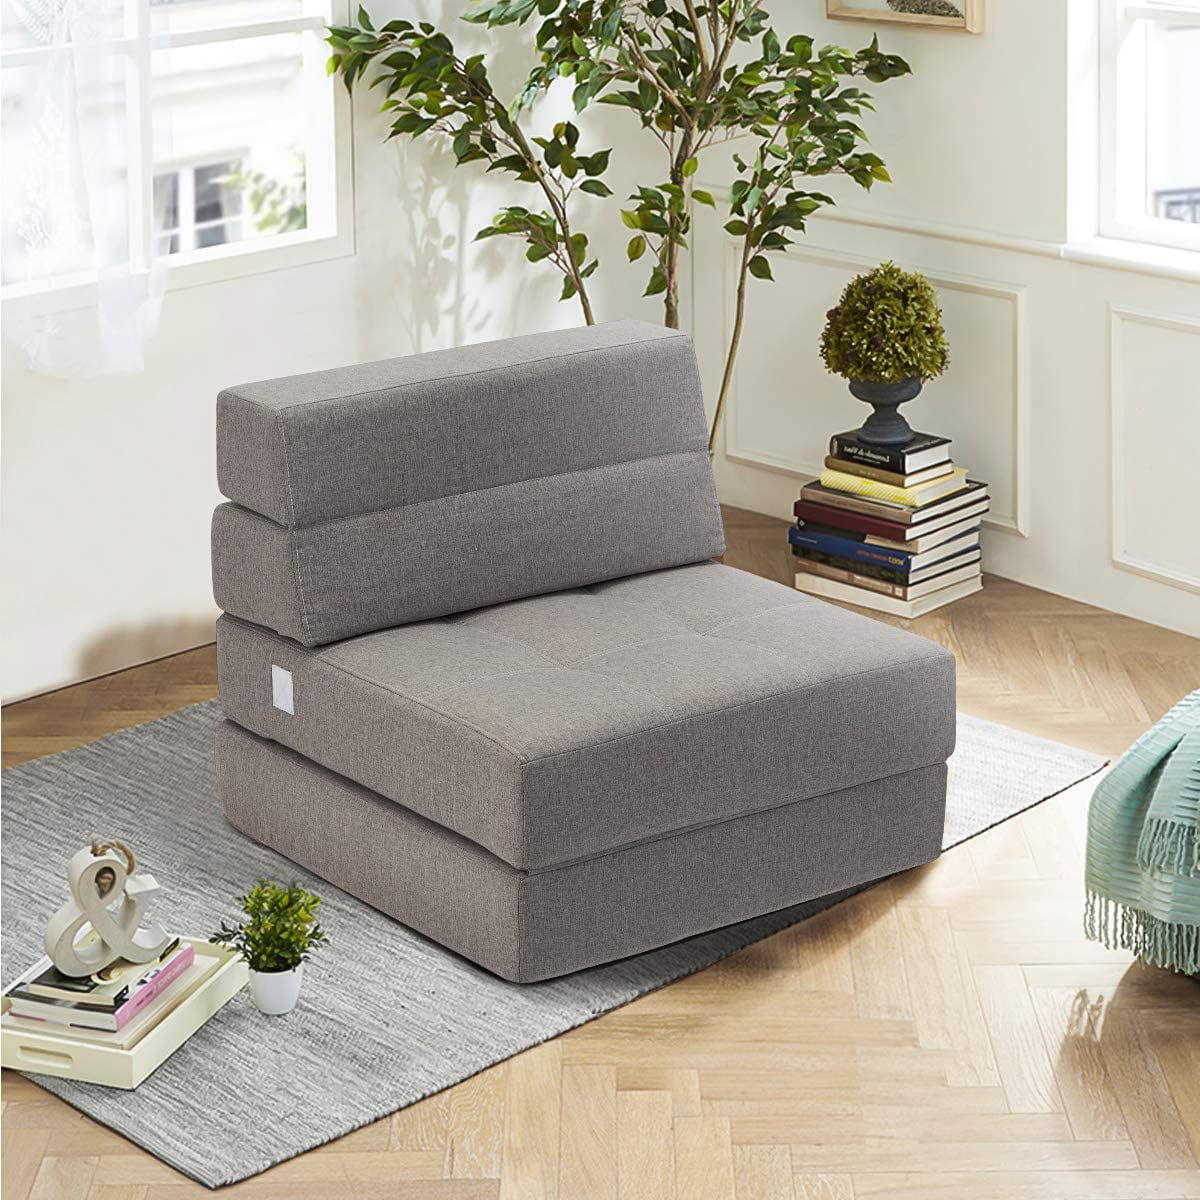 Featured Photo of The 15 Best Collection of 2 in 1 Foldable Sofas